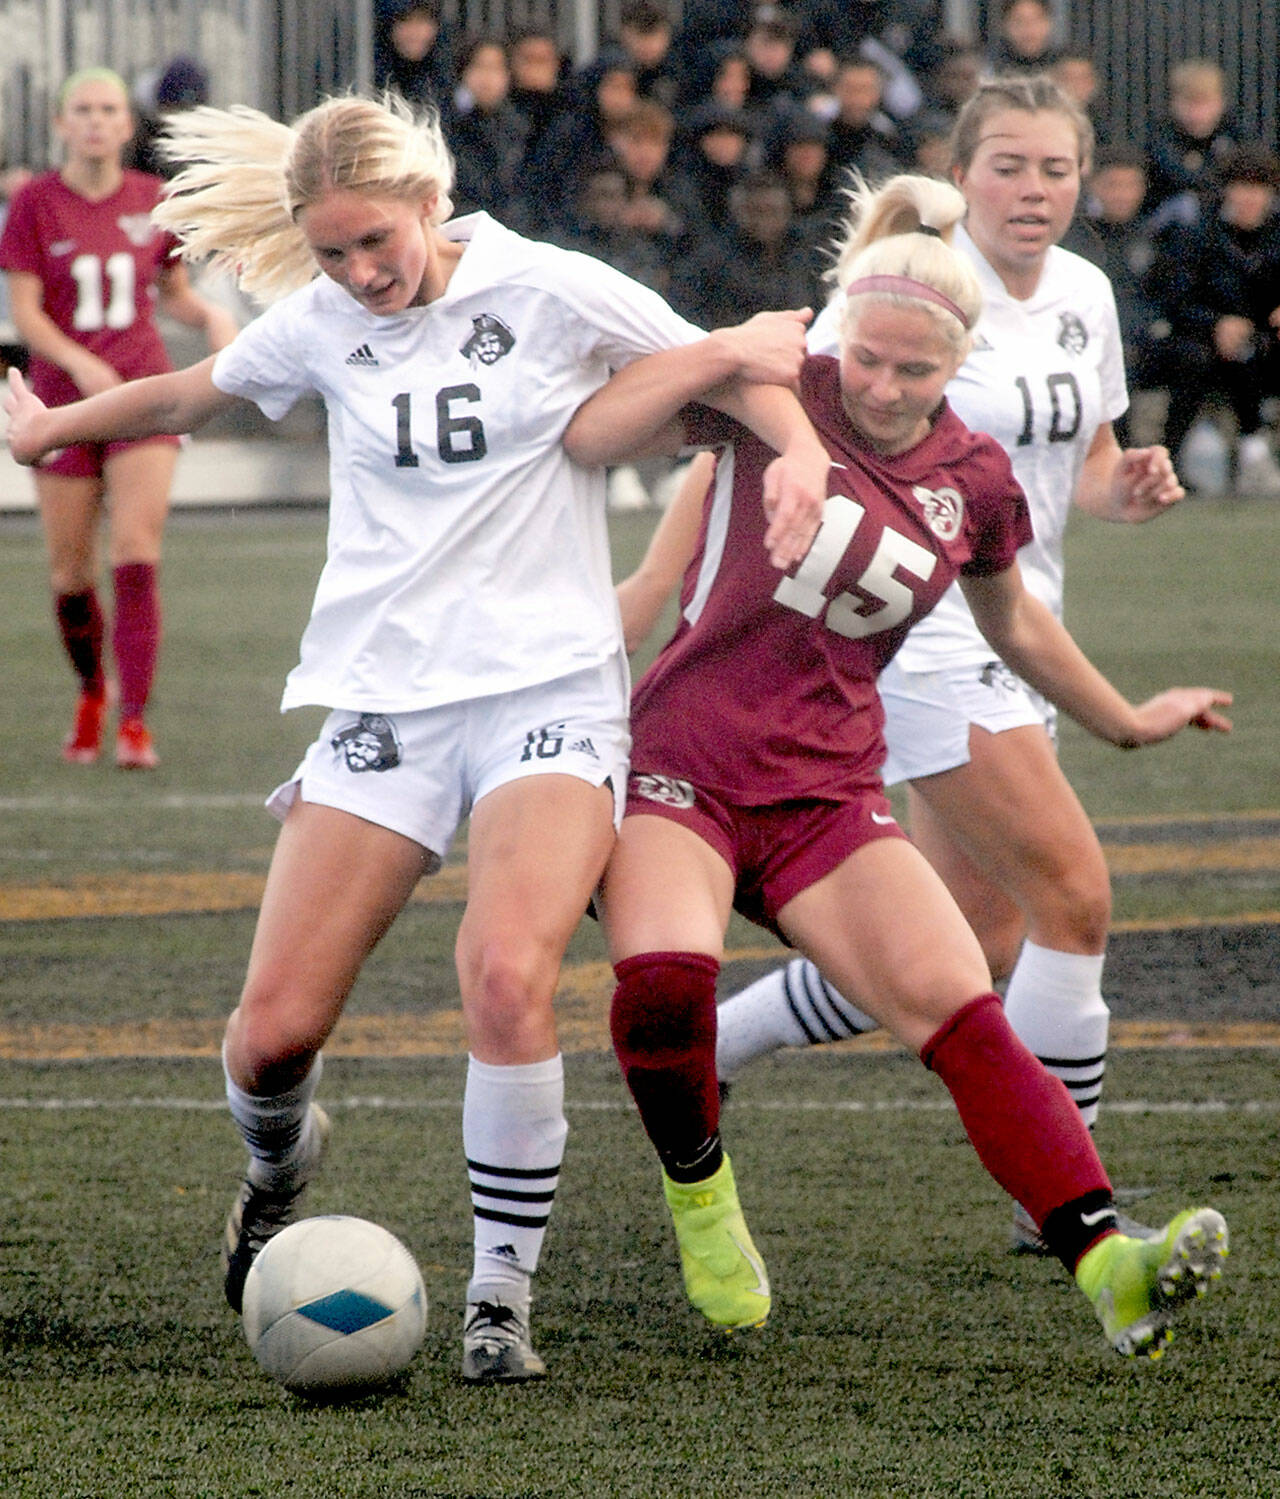 Peninsula’s Millie Long, front left, tangles with Pierce’s Rachel Mironchuk as Long’s teammate, Grace Johnson, looks on from behind during Saturday’s NWAC quarterfinal playoff match in Port Angeles. (Keith Thorpe/Peninsula Daily News)